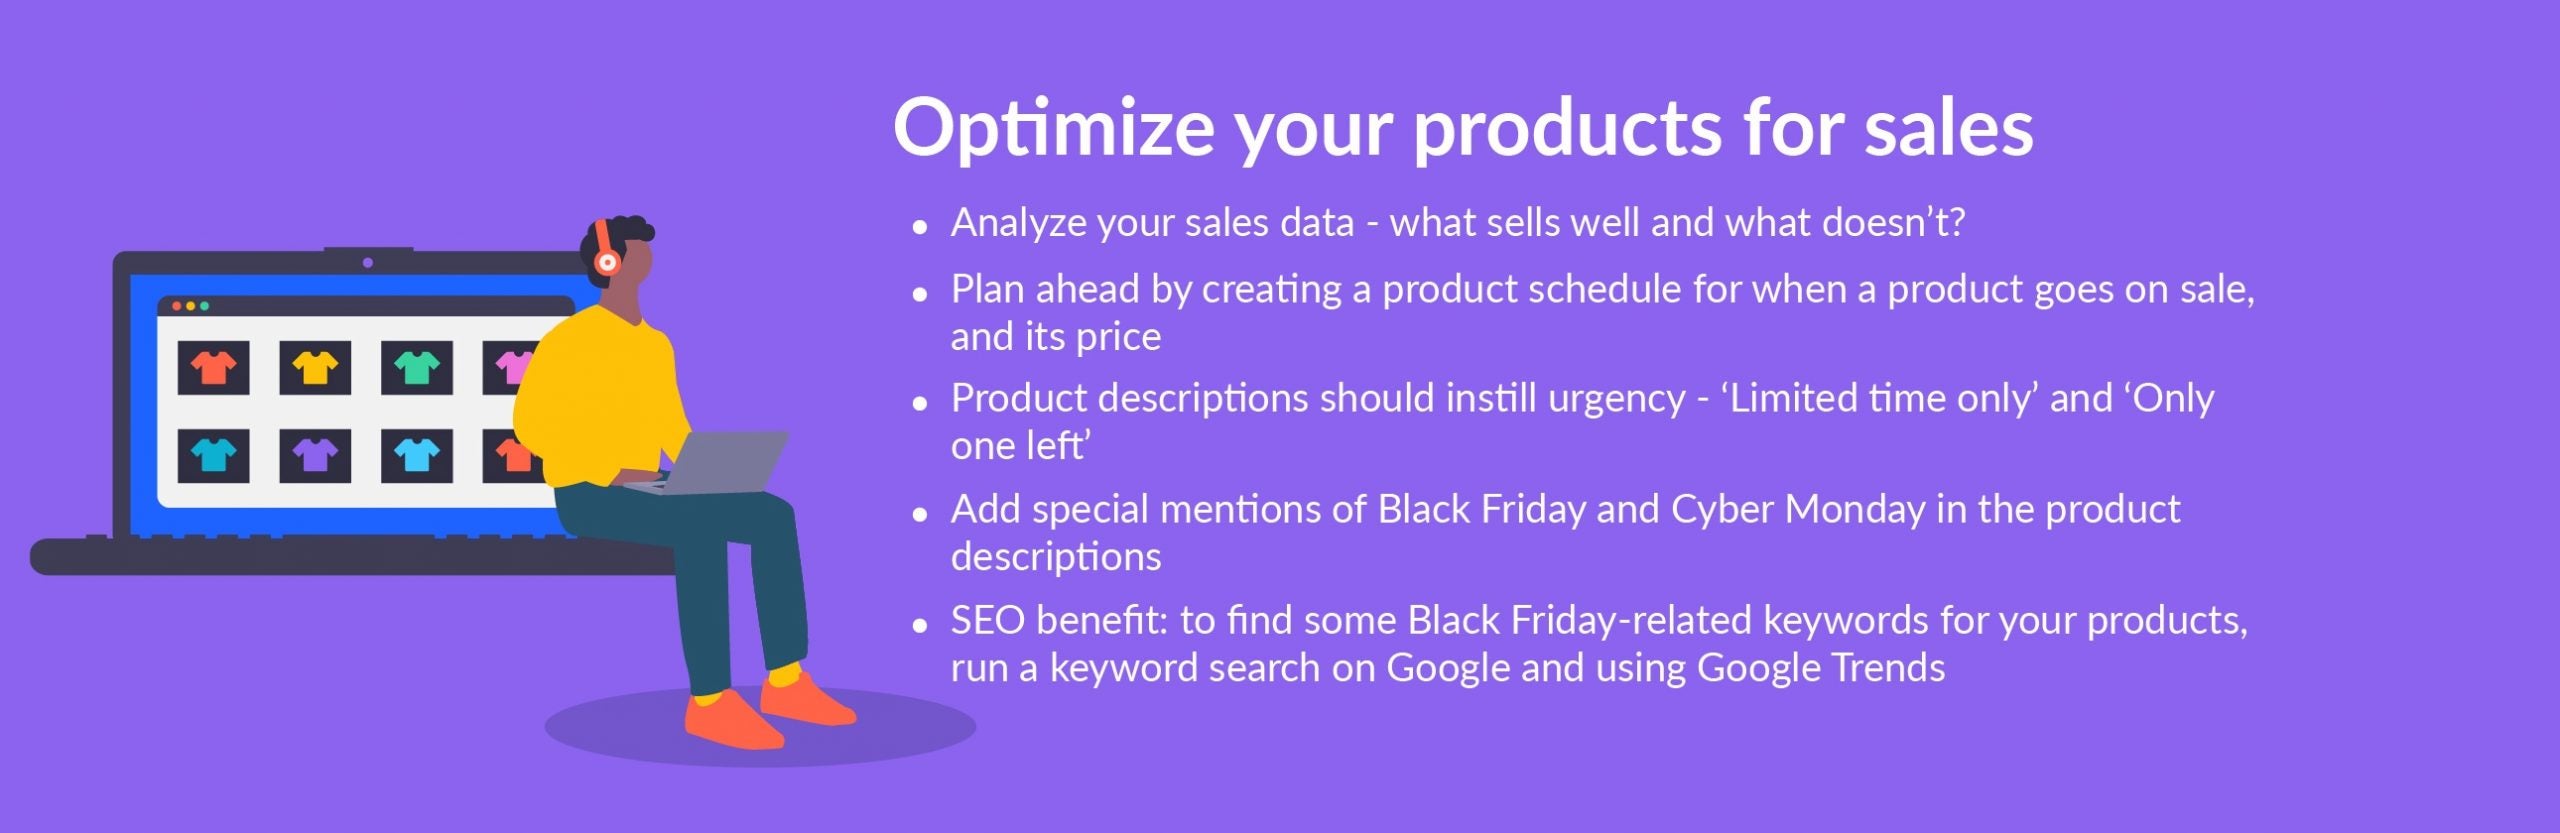 black friday tip optimize products